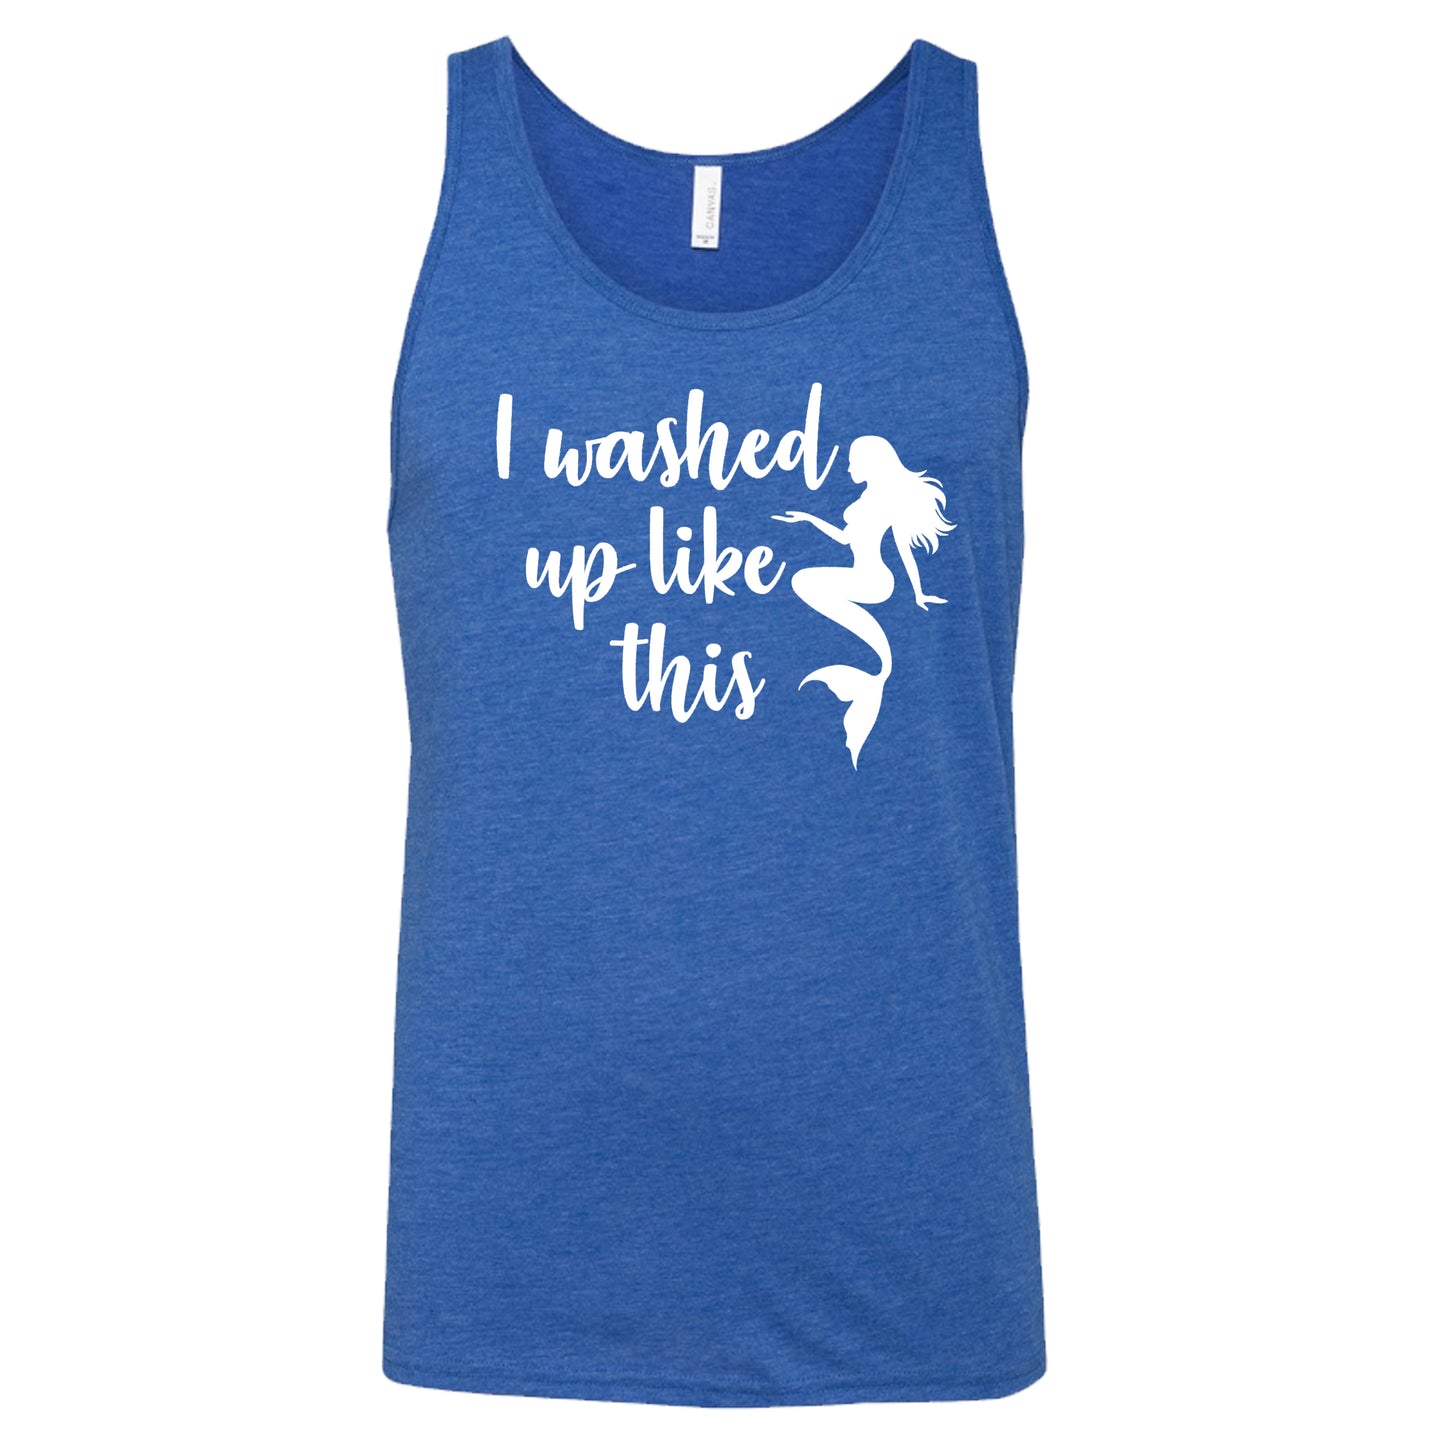 blue unisex tank with the saying "i washed up like this" in white in the center